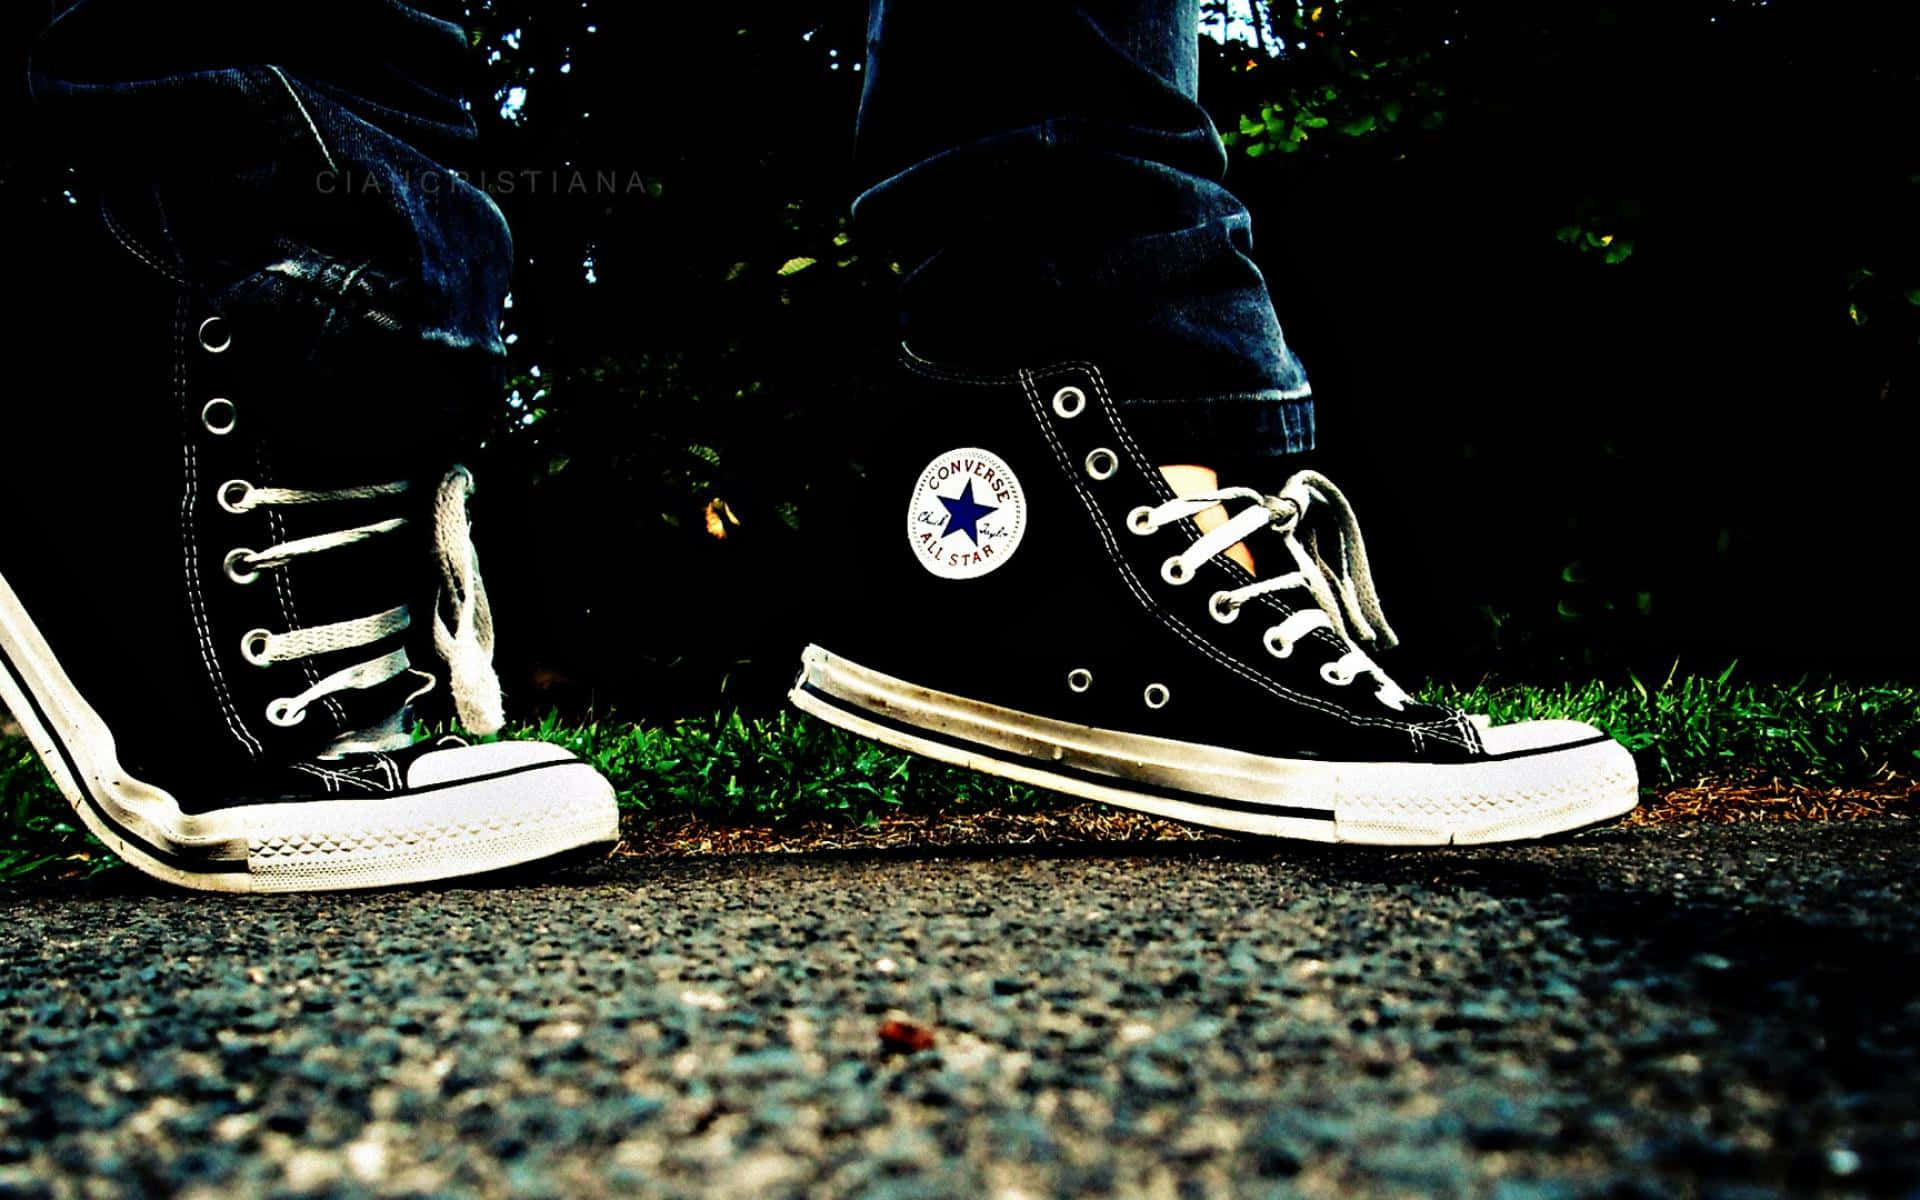 Walk with confidence in Converse